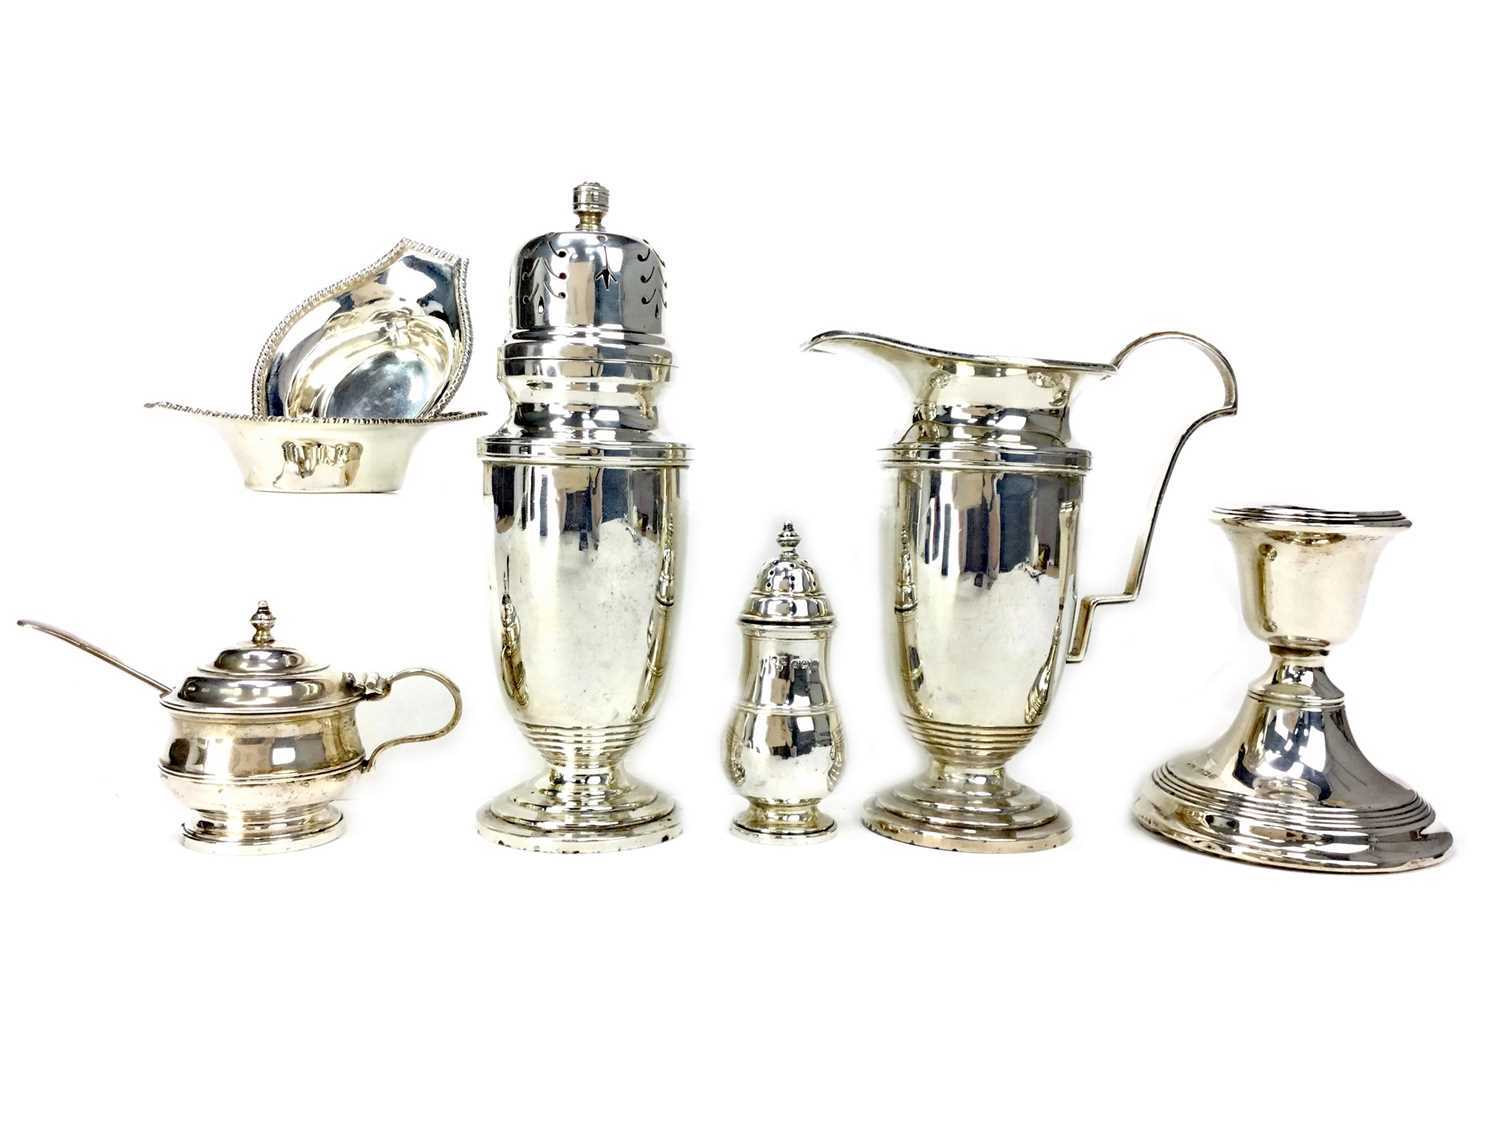 Lot 417 - A SILVER SUGAR CASTER, A CREAMER, TWO SALTS, PEPPERETTE, MUSTARD POT, AND CANDLESTICK